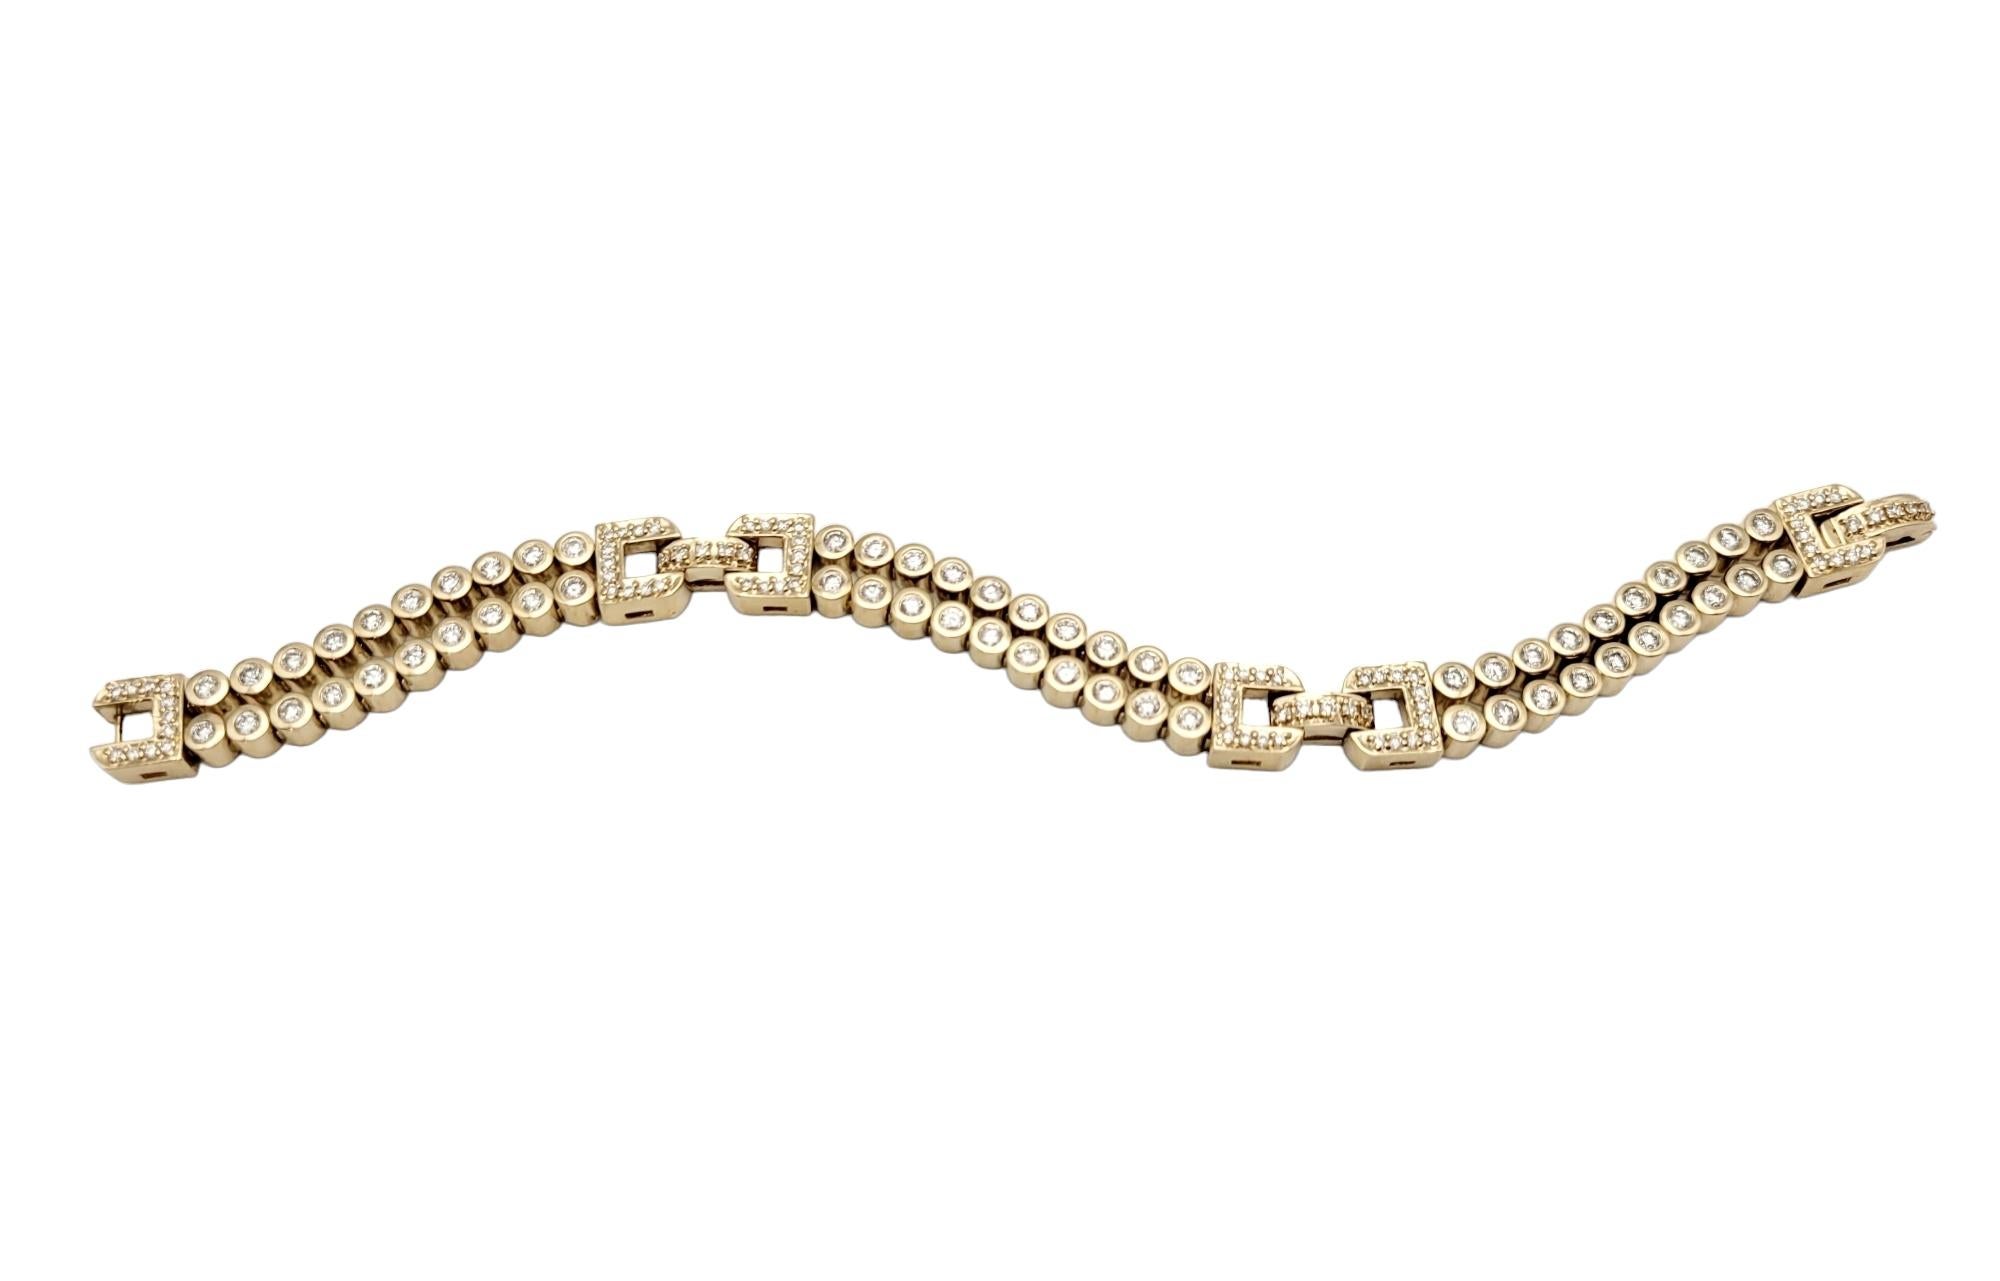 This exquisite gold bracelet is a stunning piece of elegance. Crafted from 14 karat yellow gold, the bracelet features a unique design with bubble link chains that add a touch of playfulness to its sophistication. Each bubble link is adorned with a